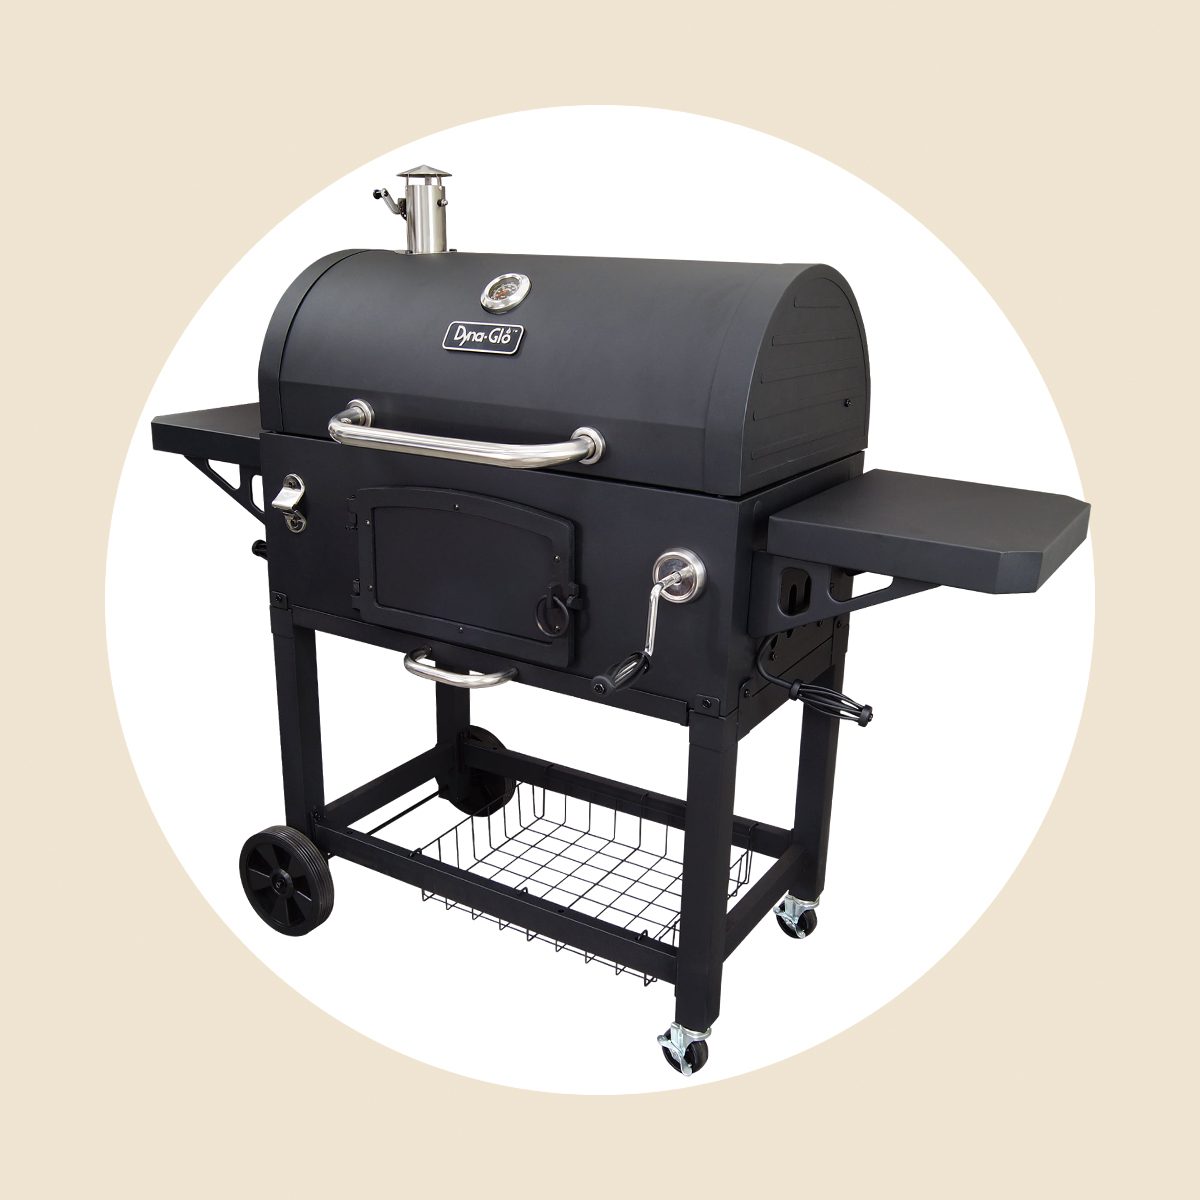 Dyna Glo X Large Heavy Duty Charcoal Grill